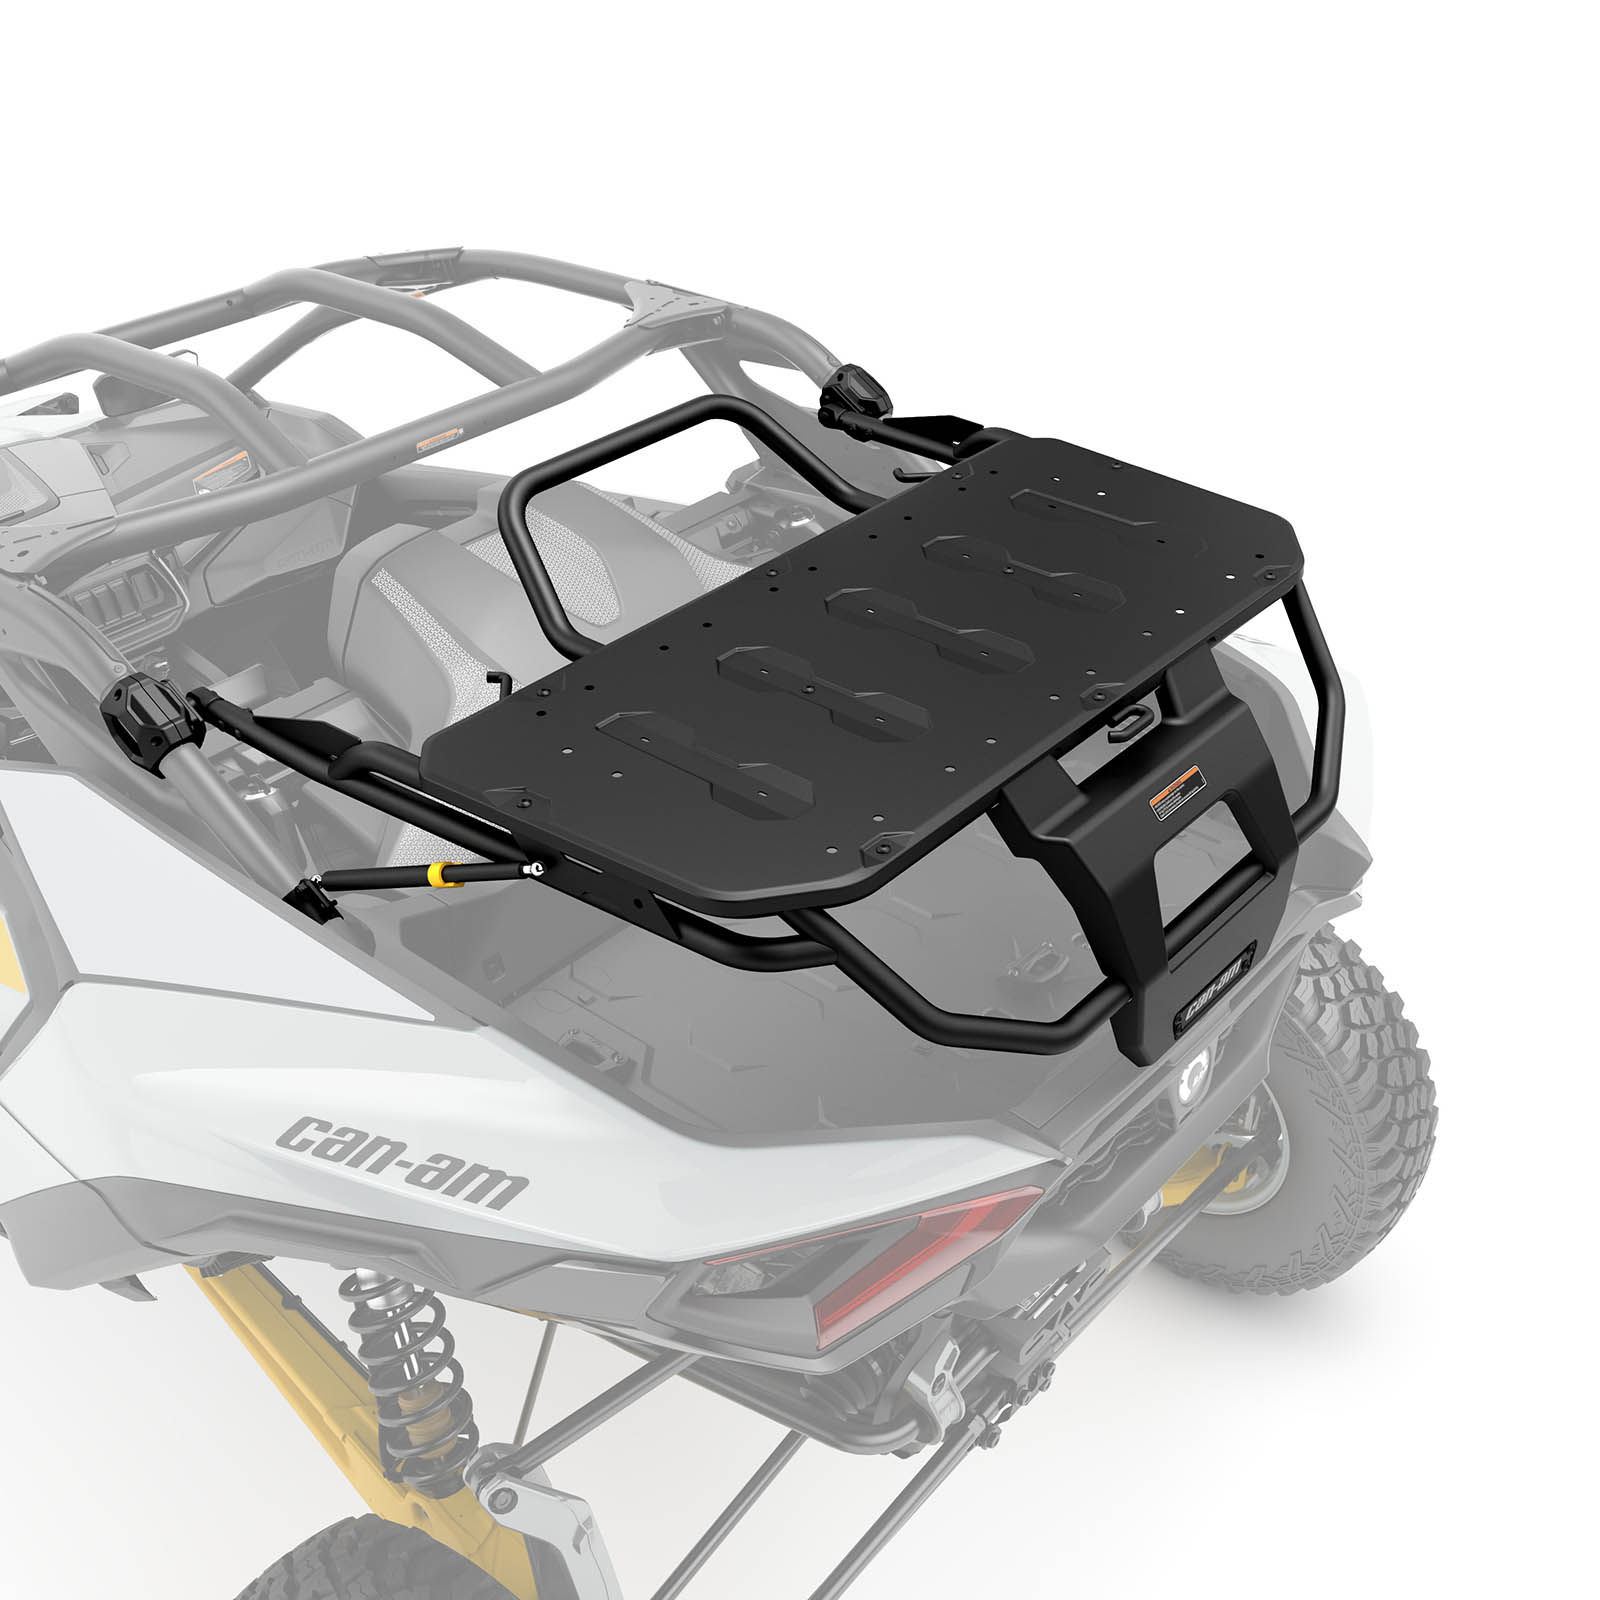 LinQ Pivoting Rack for Can-Am SxS vehicles